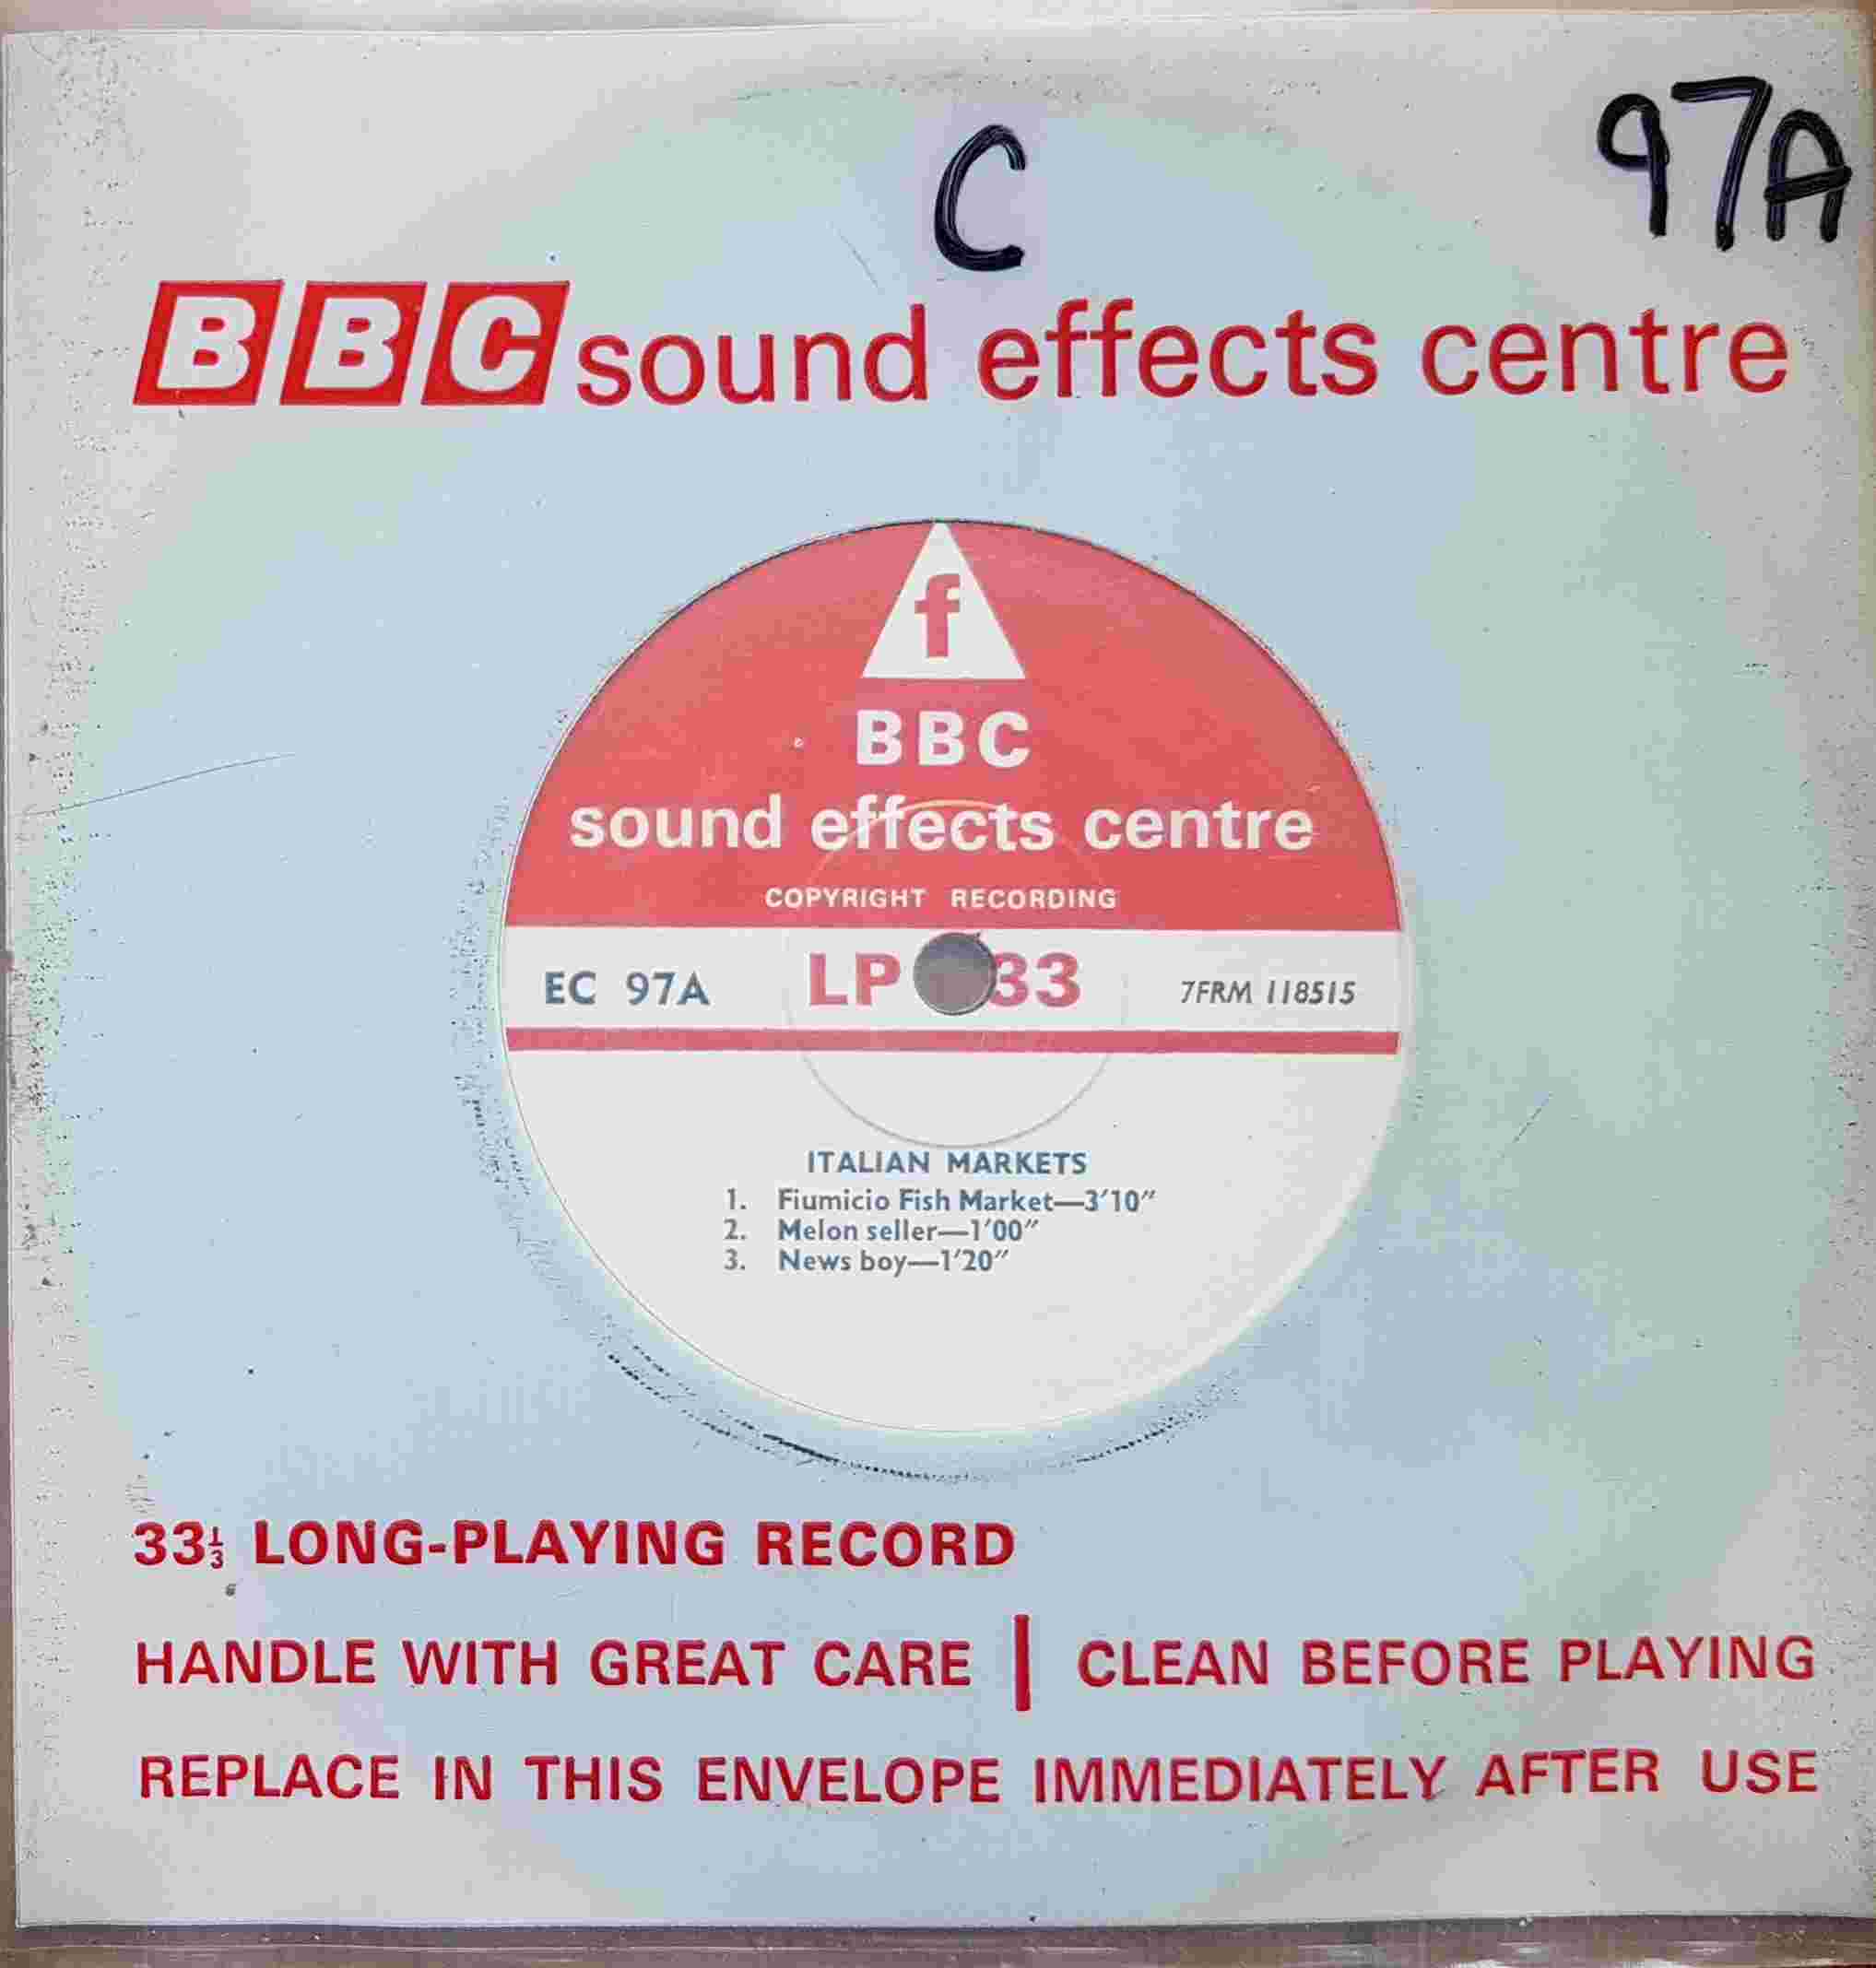 Picture of EC 97A Italian markets by artist Not registered from the BBC records and Tapes library